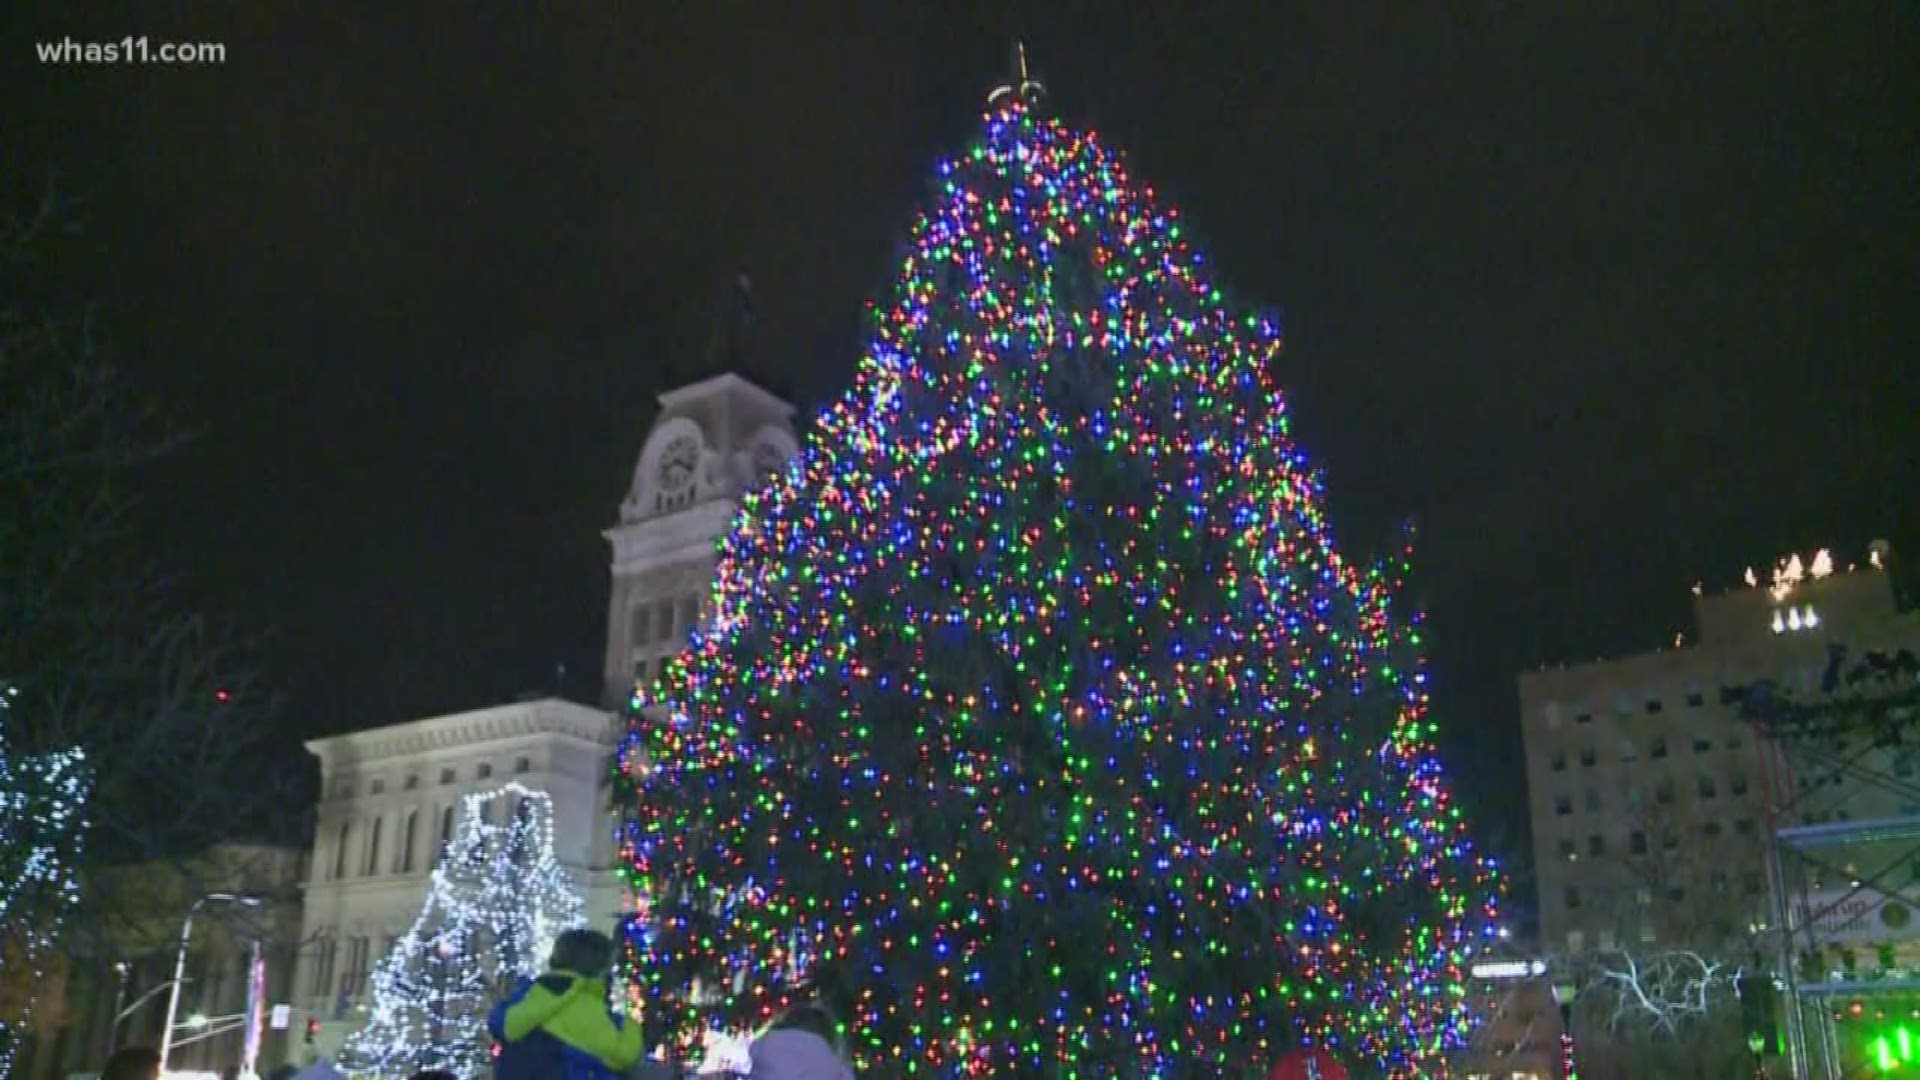 The Light Up Louisville event will be held December 6